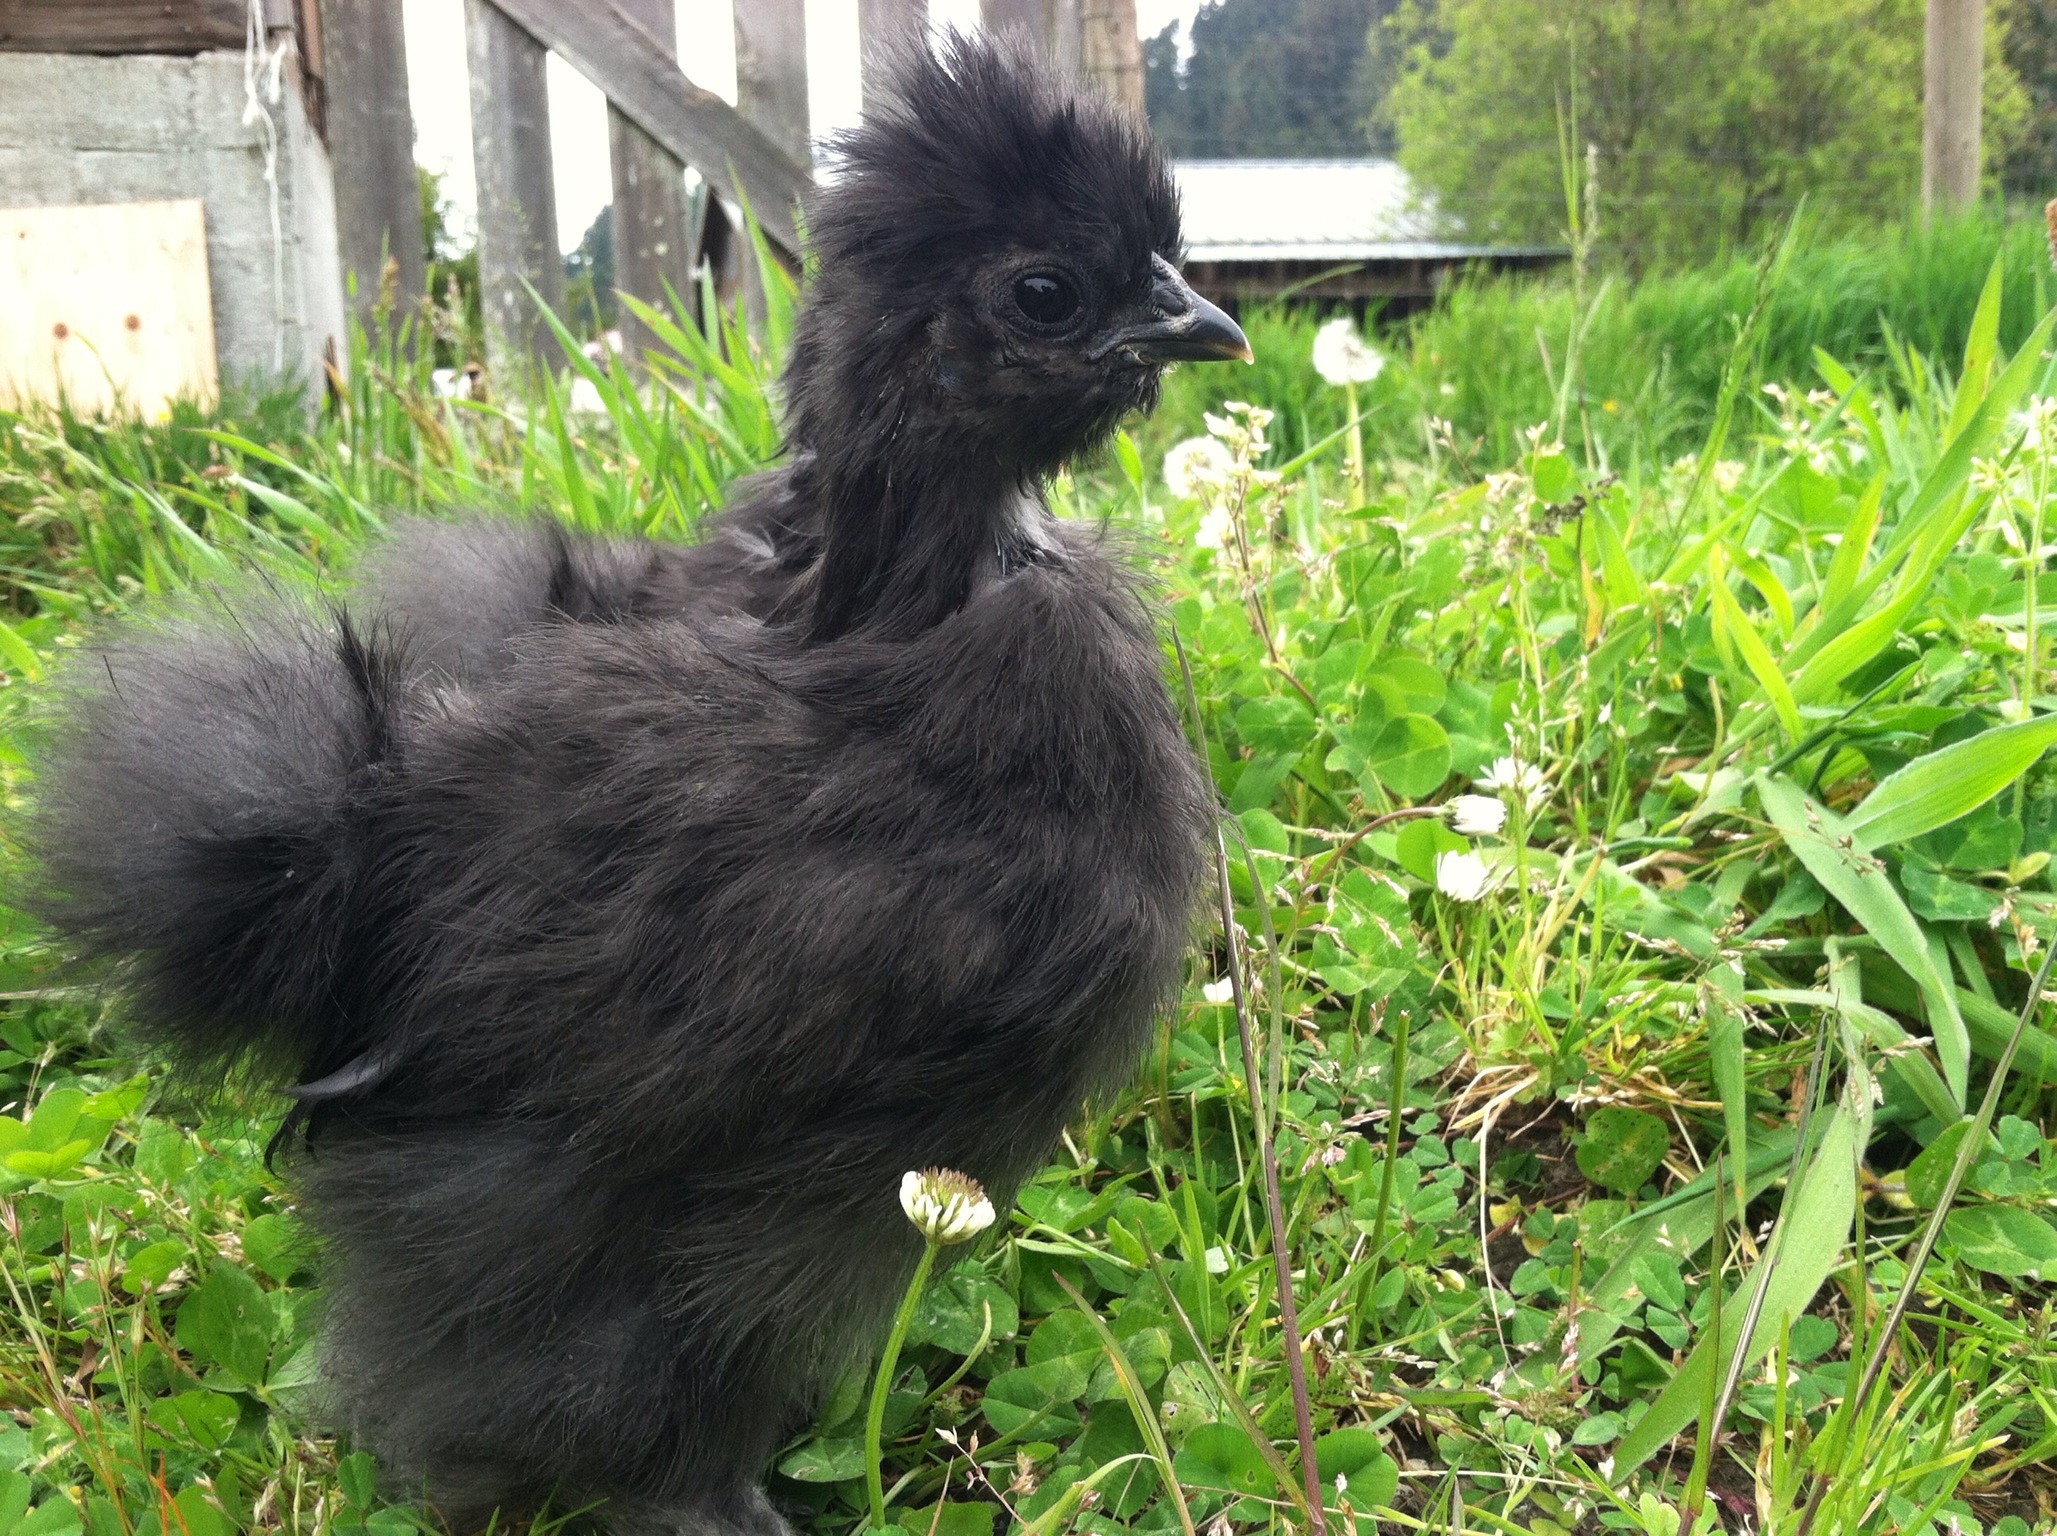 Silkies have recently become my favorite breed! They are so docile and sweet.